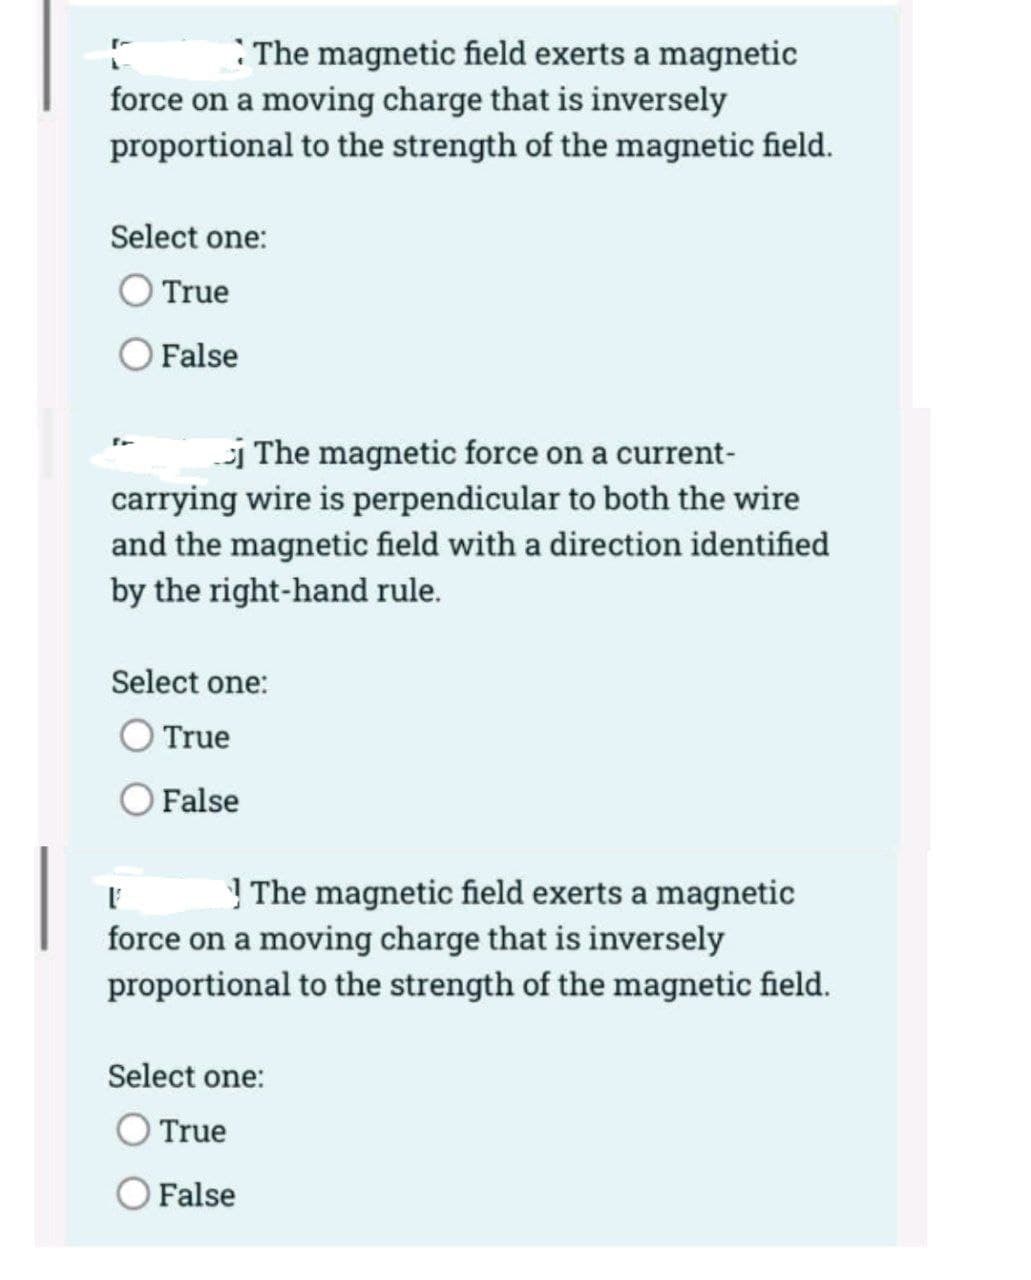 :The magnetic field exerts a magnetic
force on a moving charge that is inversely
proportional to the strength of the magnetic field.
Select one:
True
False
i The magnetic force on a current-
carrying wire is perpendicular to both the wire
and the magnetic field with a direction identified
by the right-hand rule.
Select one:
True
False
I ! The magnetic field exerts a magnetic
force on a moving charge that is inversely
proportional to the strength of the magnetic field.
Select one:
O True
O False
